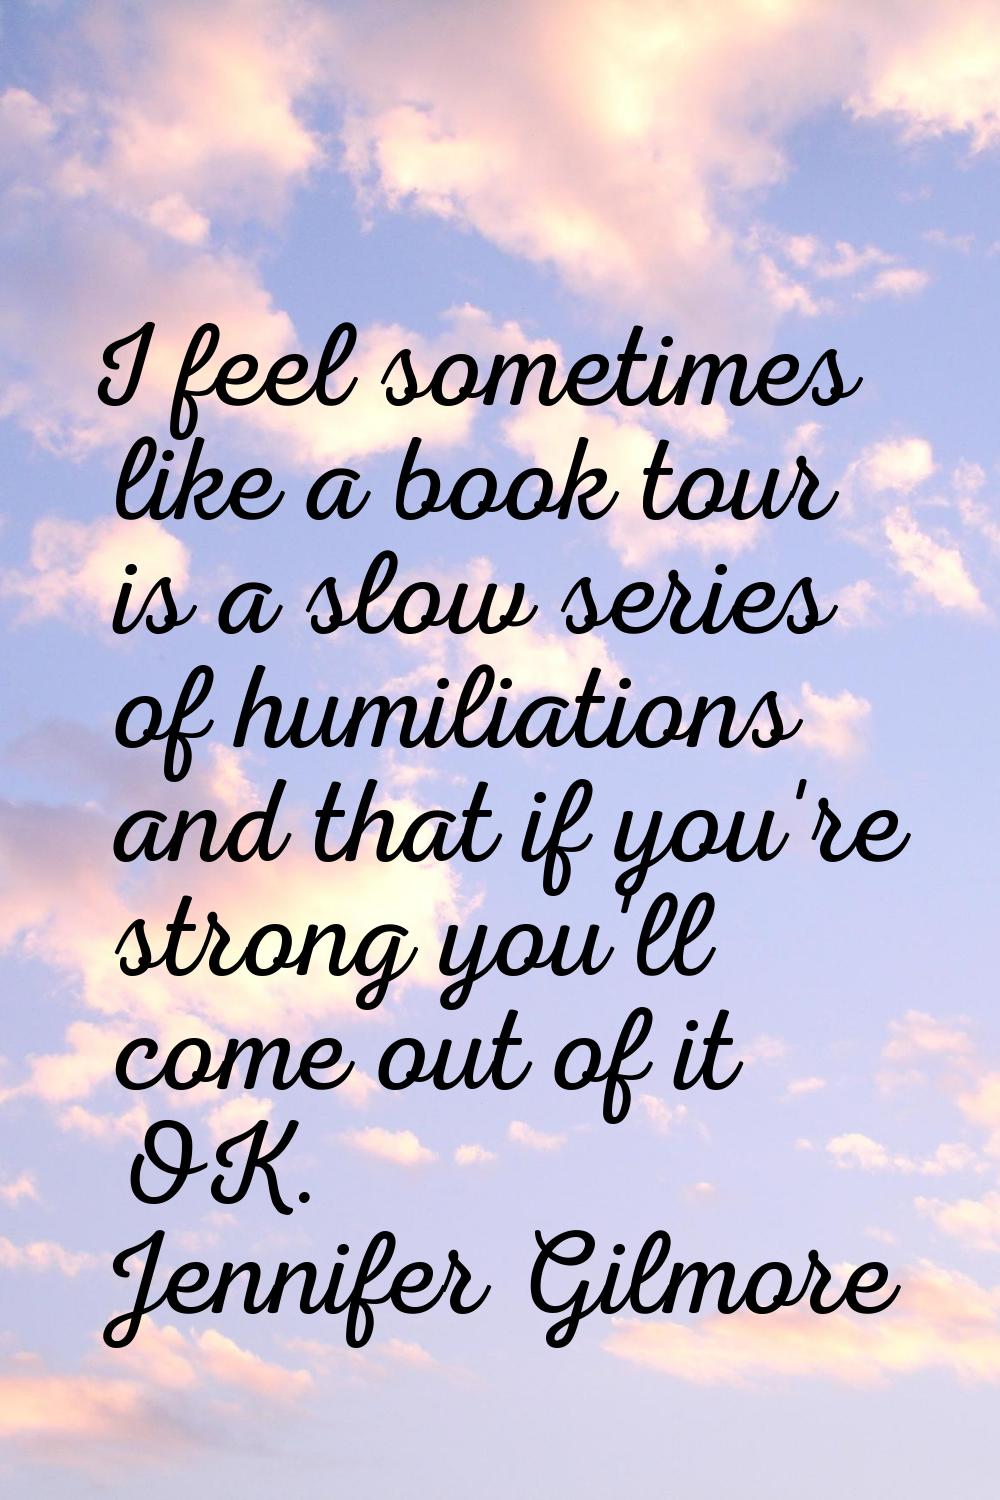 I feel sometimes like a book tour is a slow series of humiliations and that if you're strong you'll